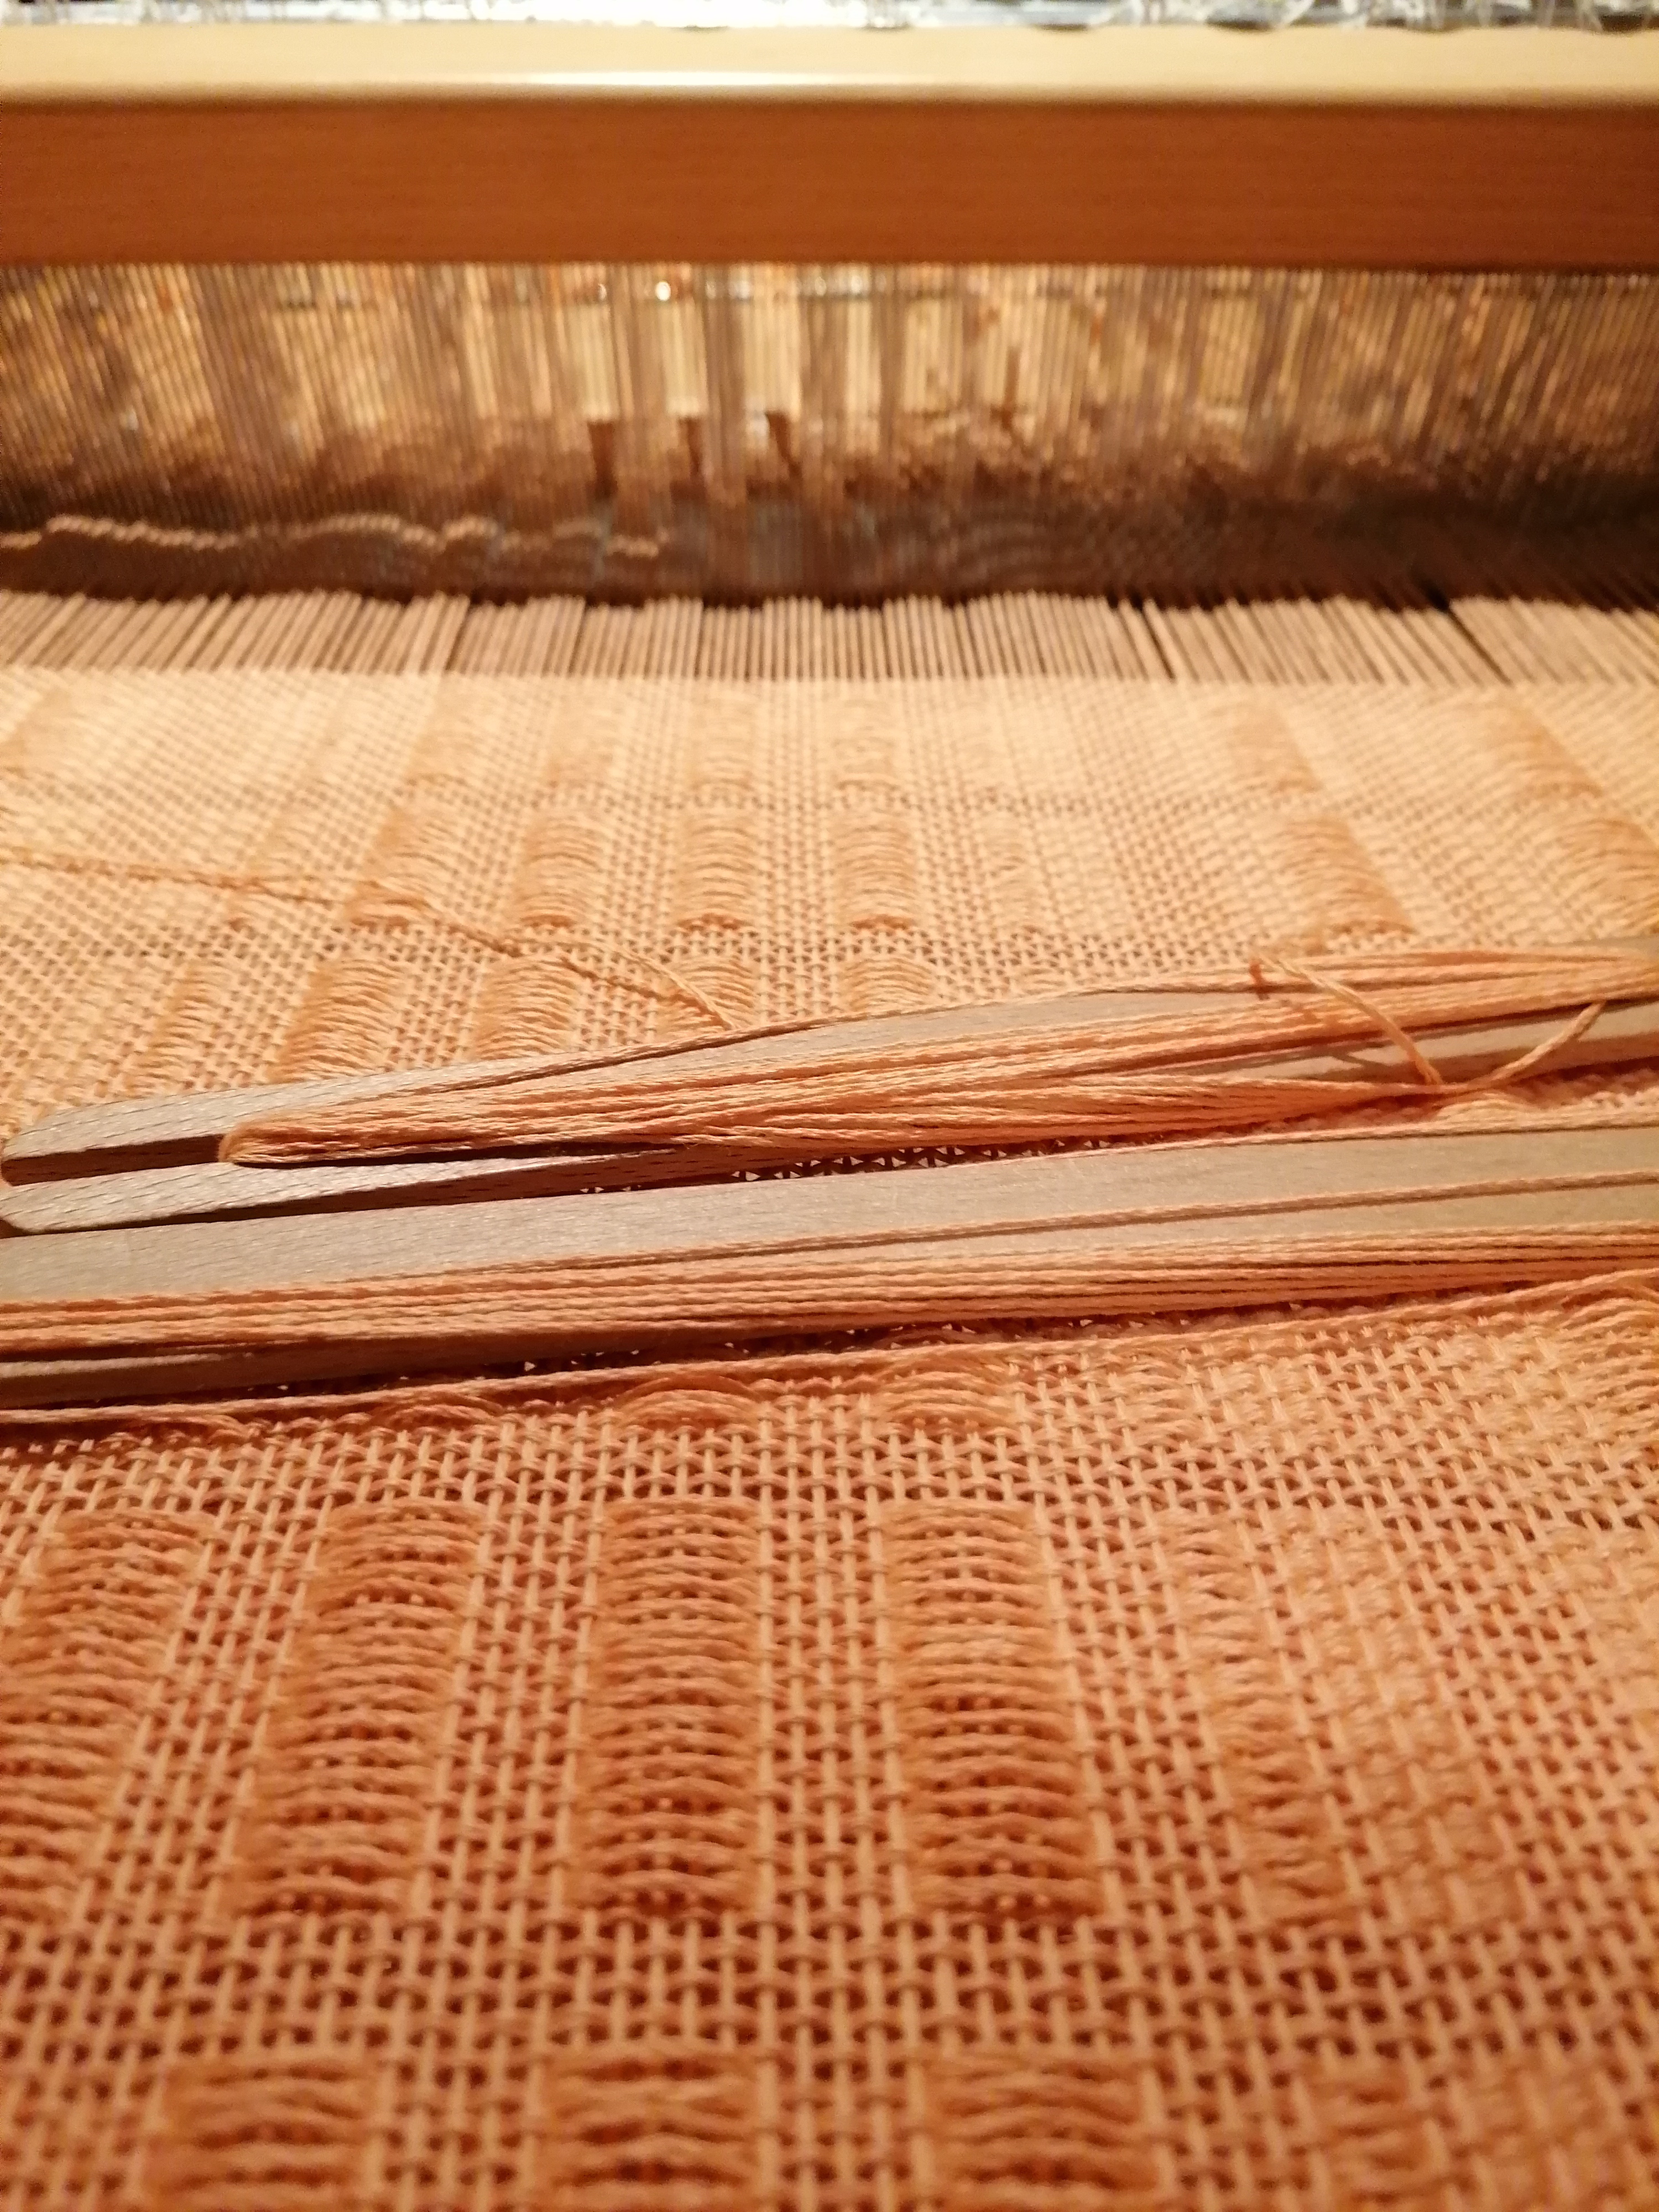 Apricot detail on loom